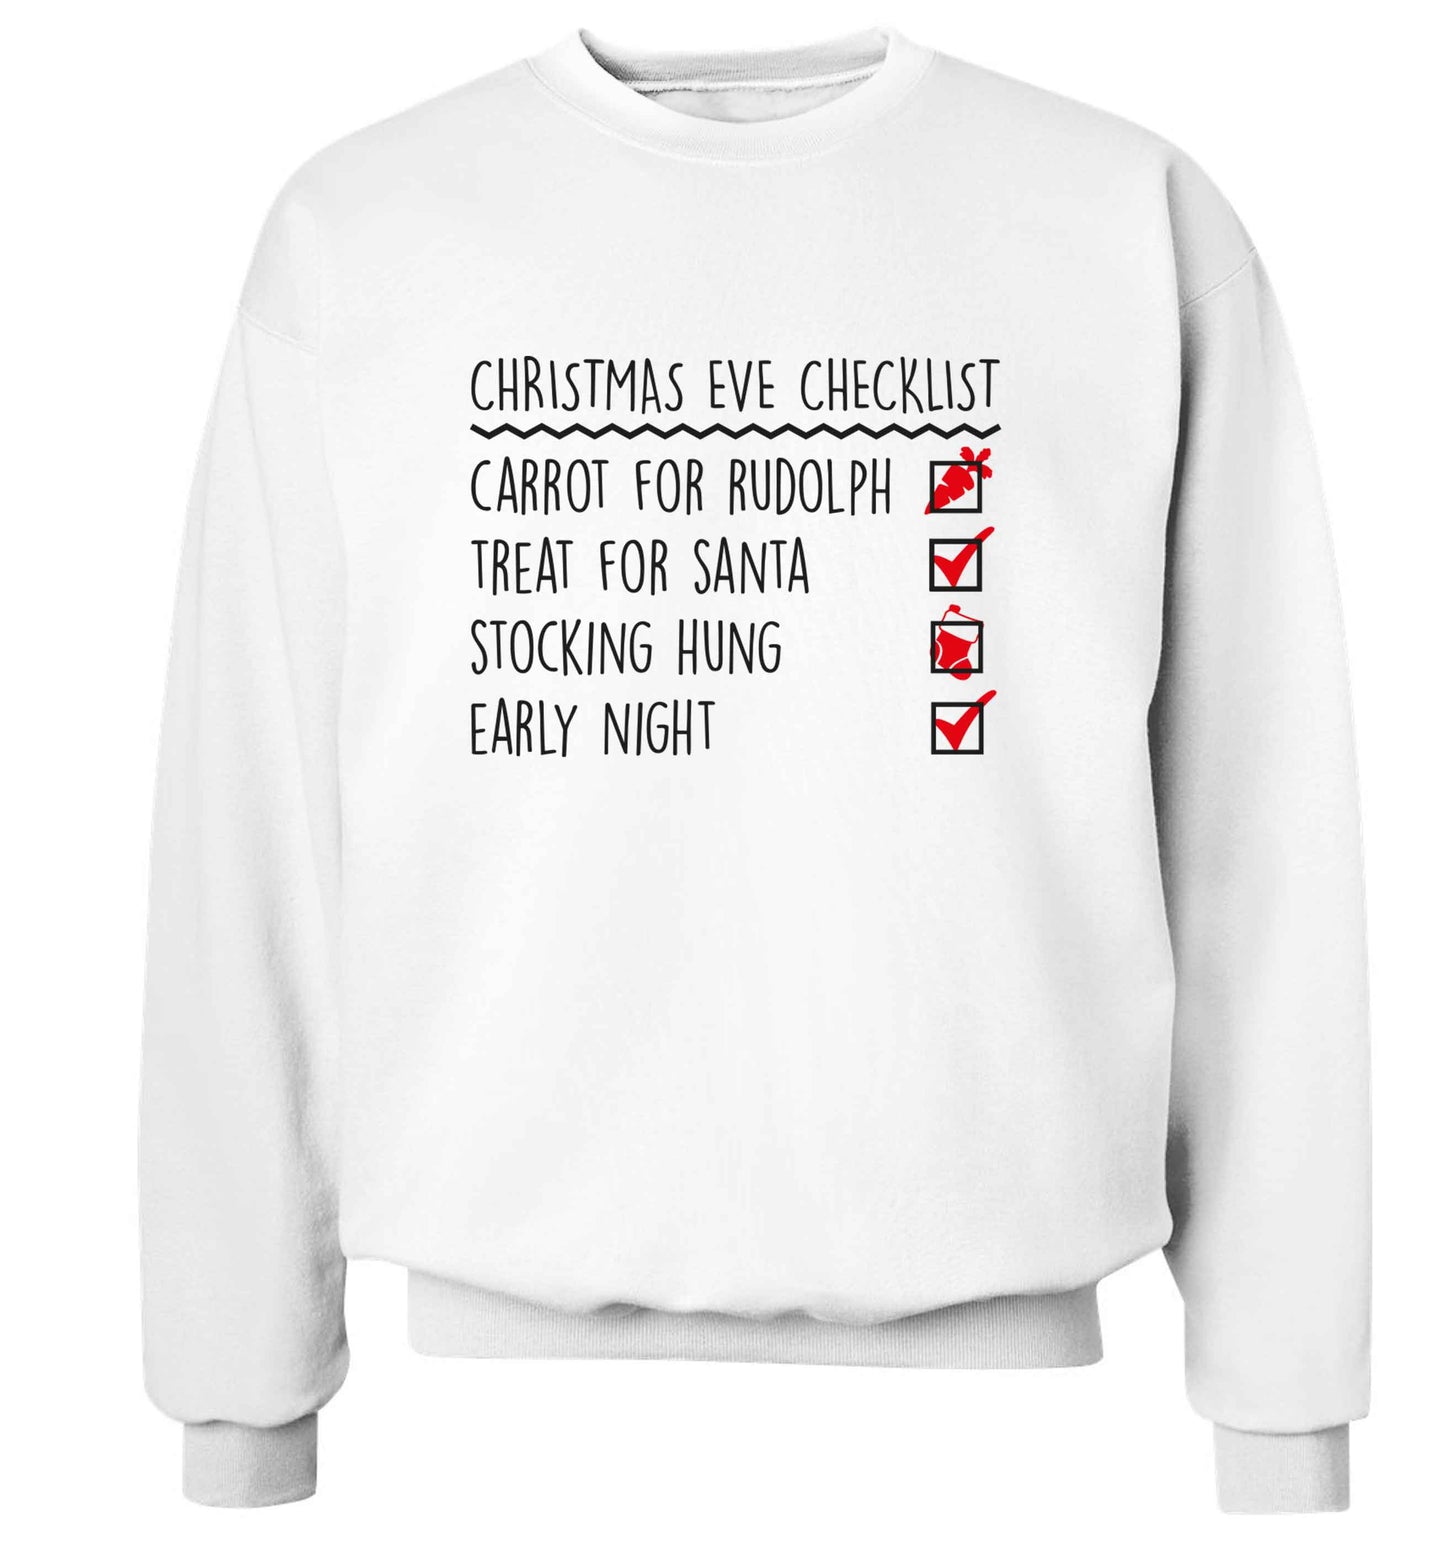 Candy Canes Candy Corns adult's unisex white sweater 2XL